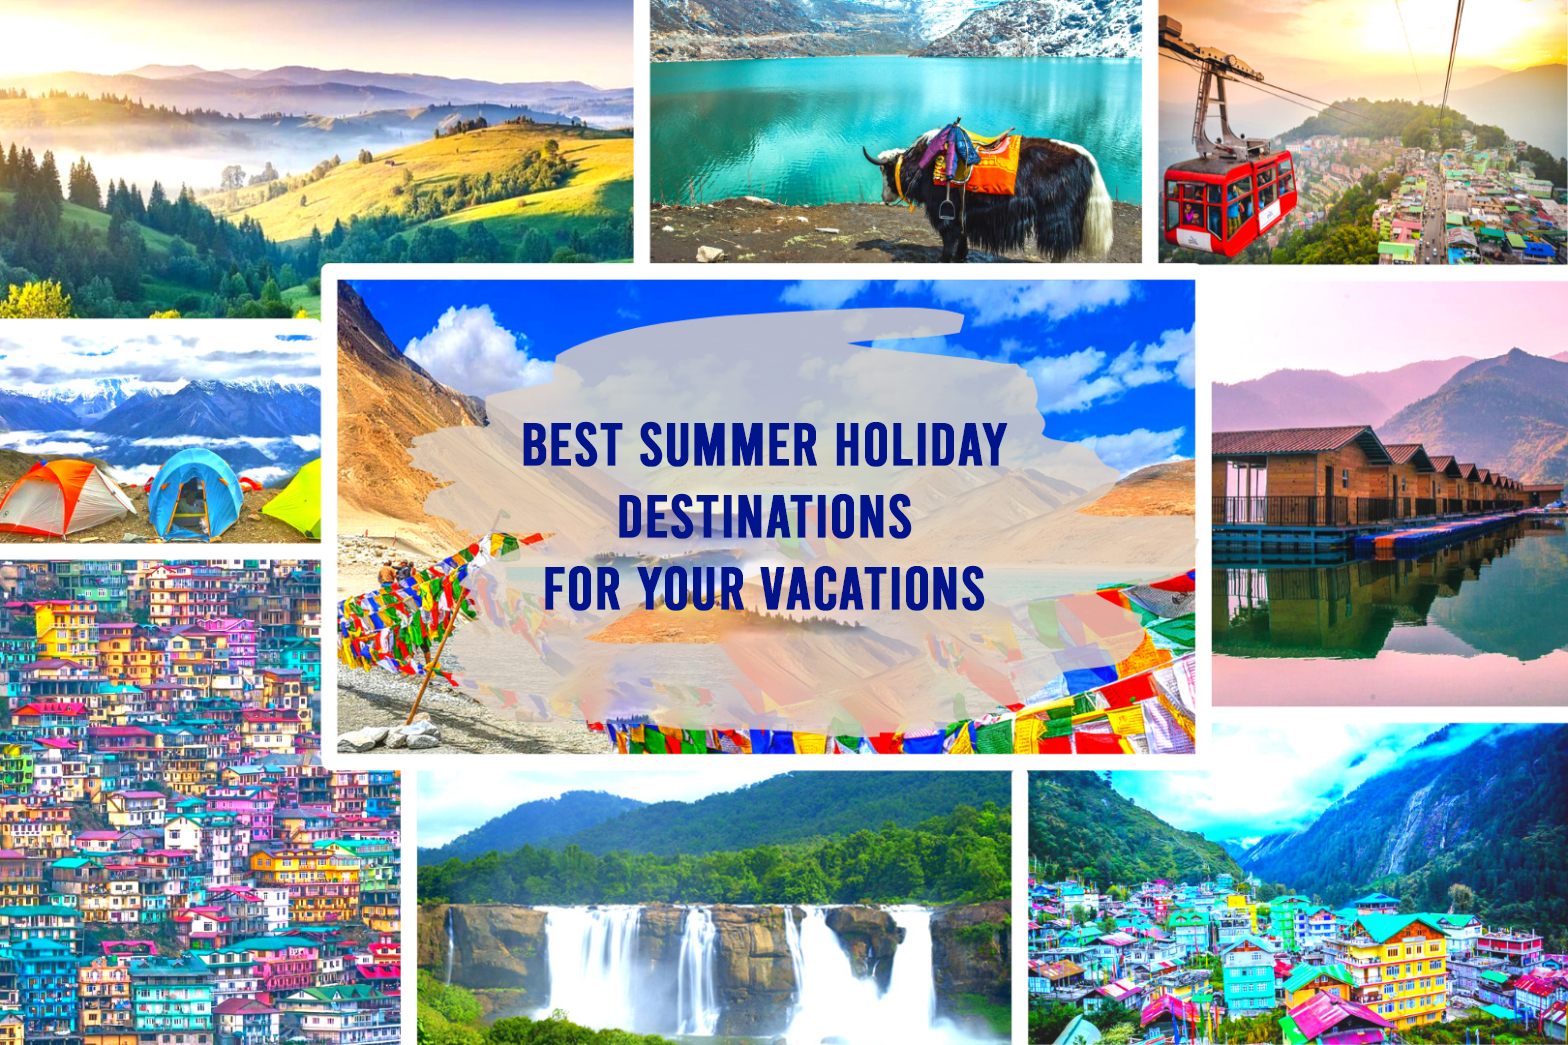 Best Summer holiday destinations for your vacations!